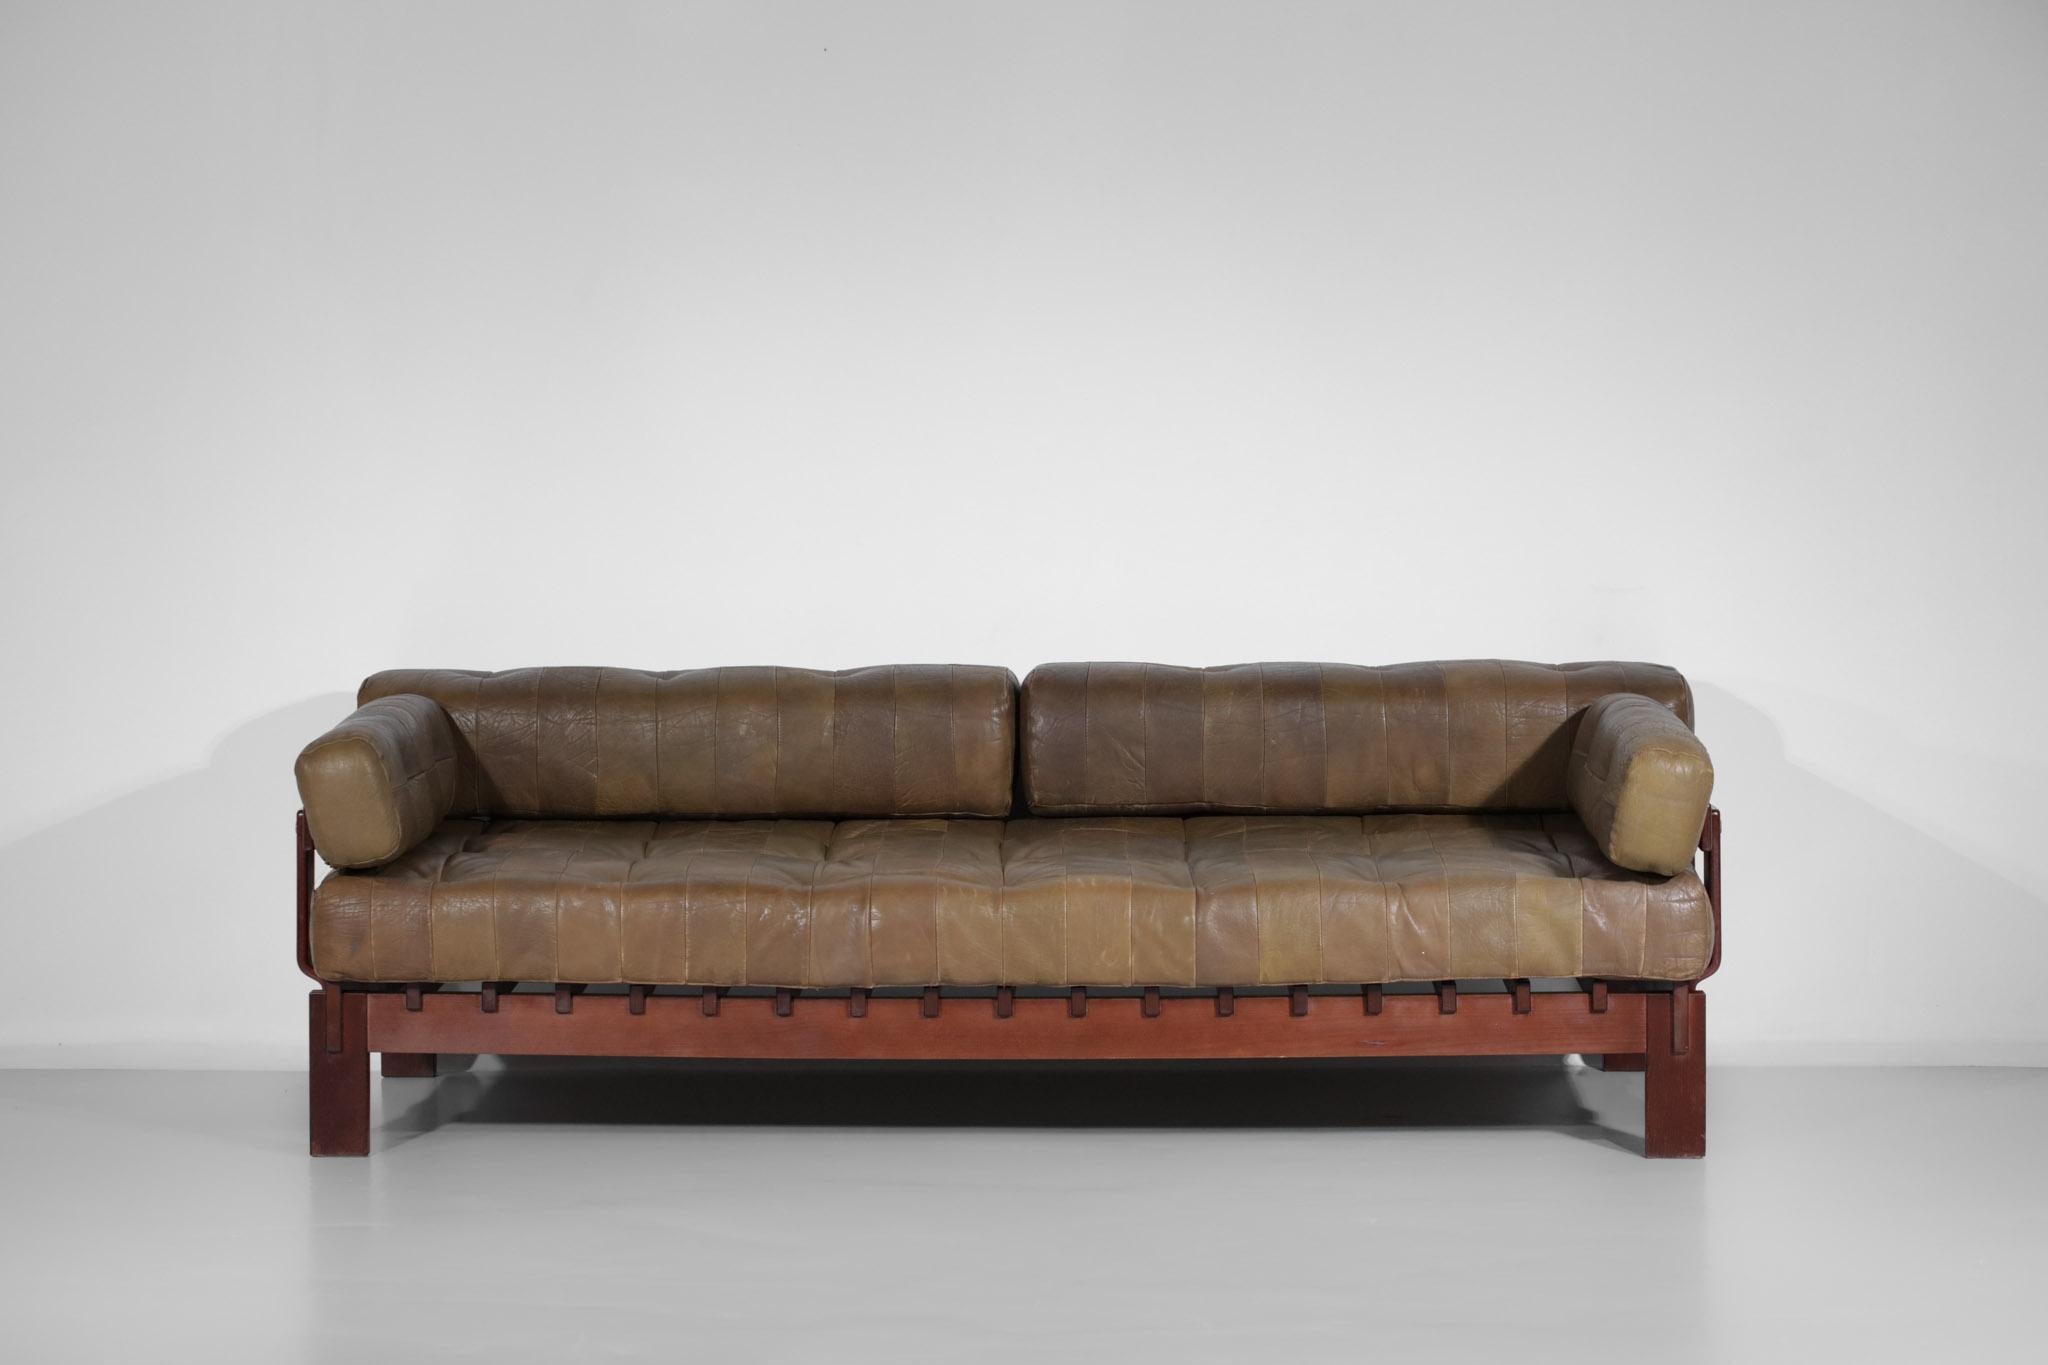 Unknown Rare Daybed Sofa from the 60's De Sede Style Leather